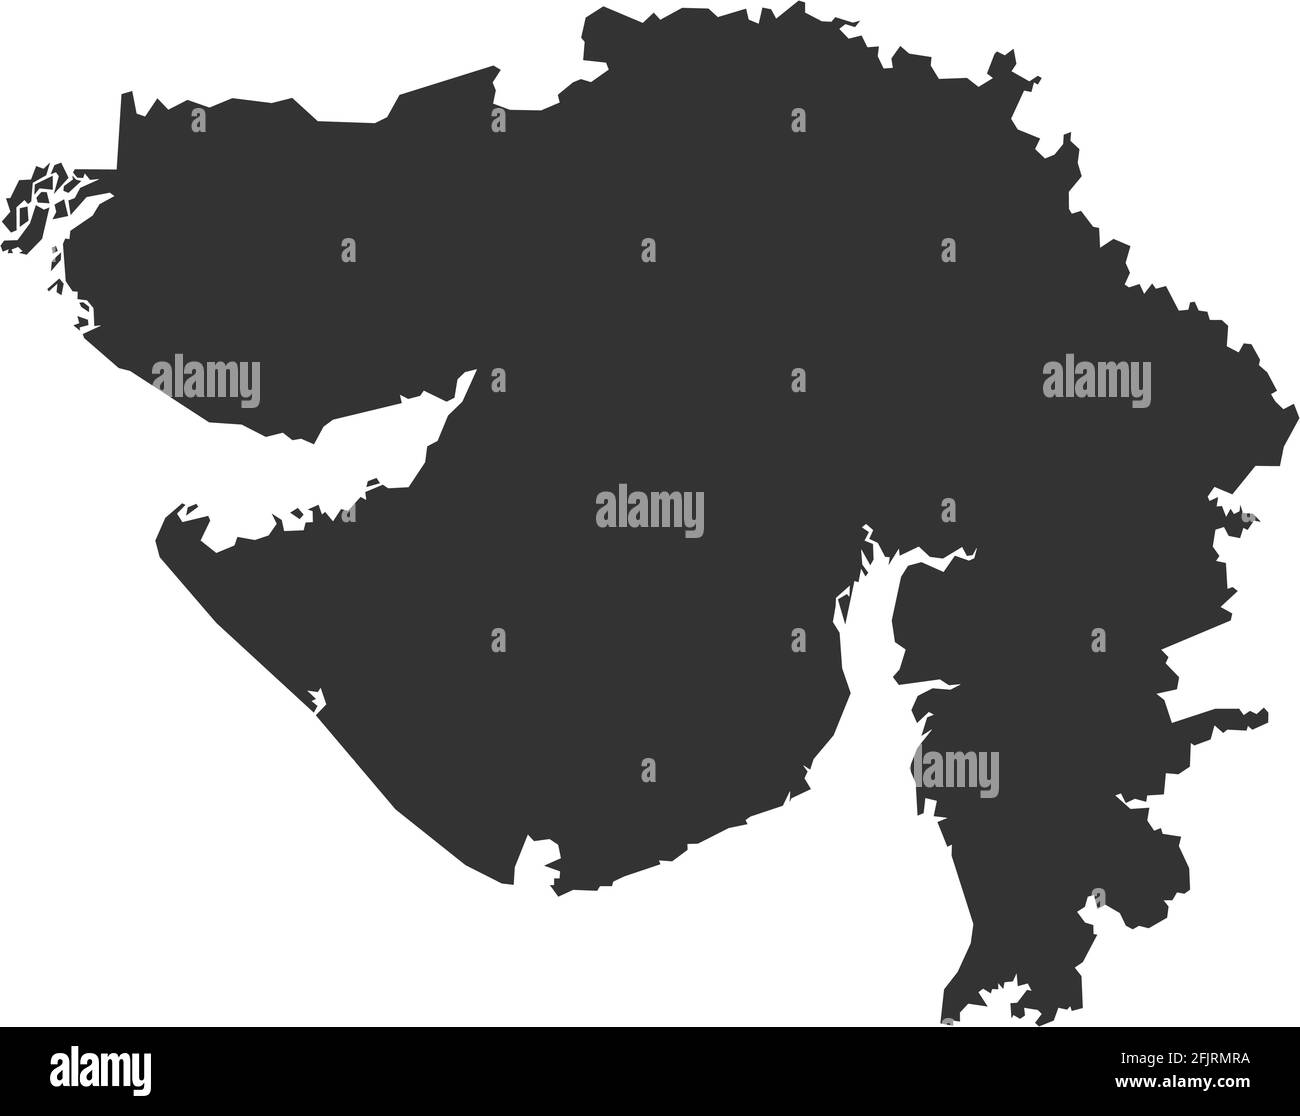 Gujarat indian state map. Dark gray background. Business concepts graphics design. Stock Vector